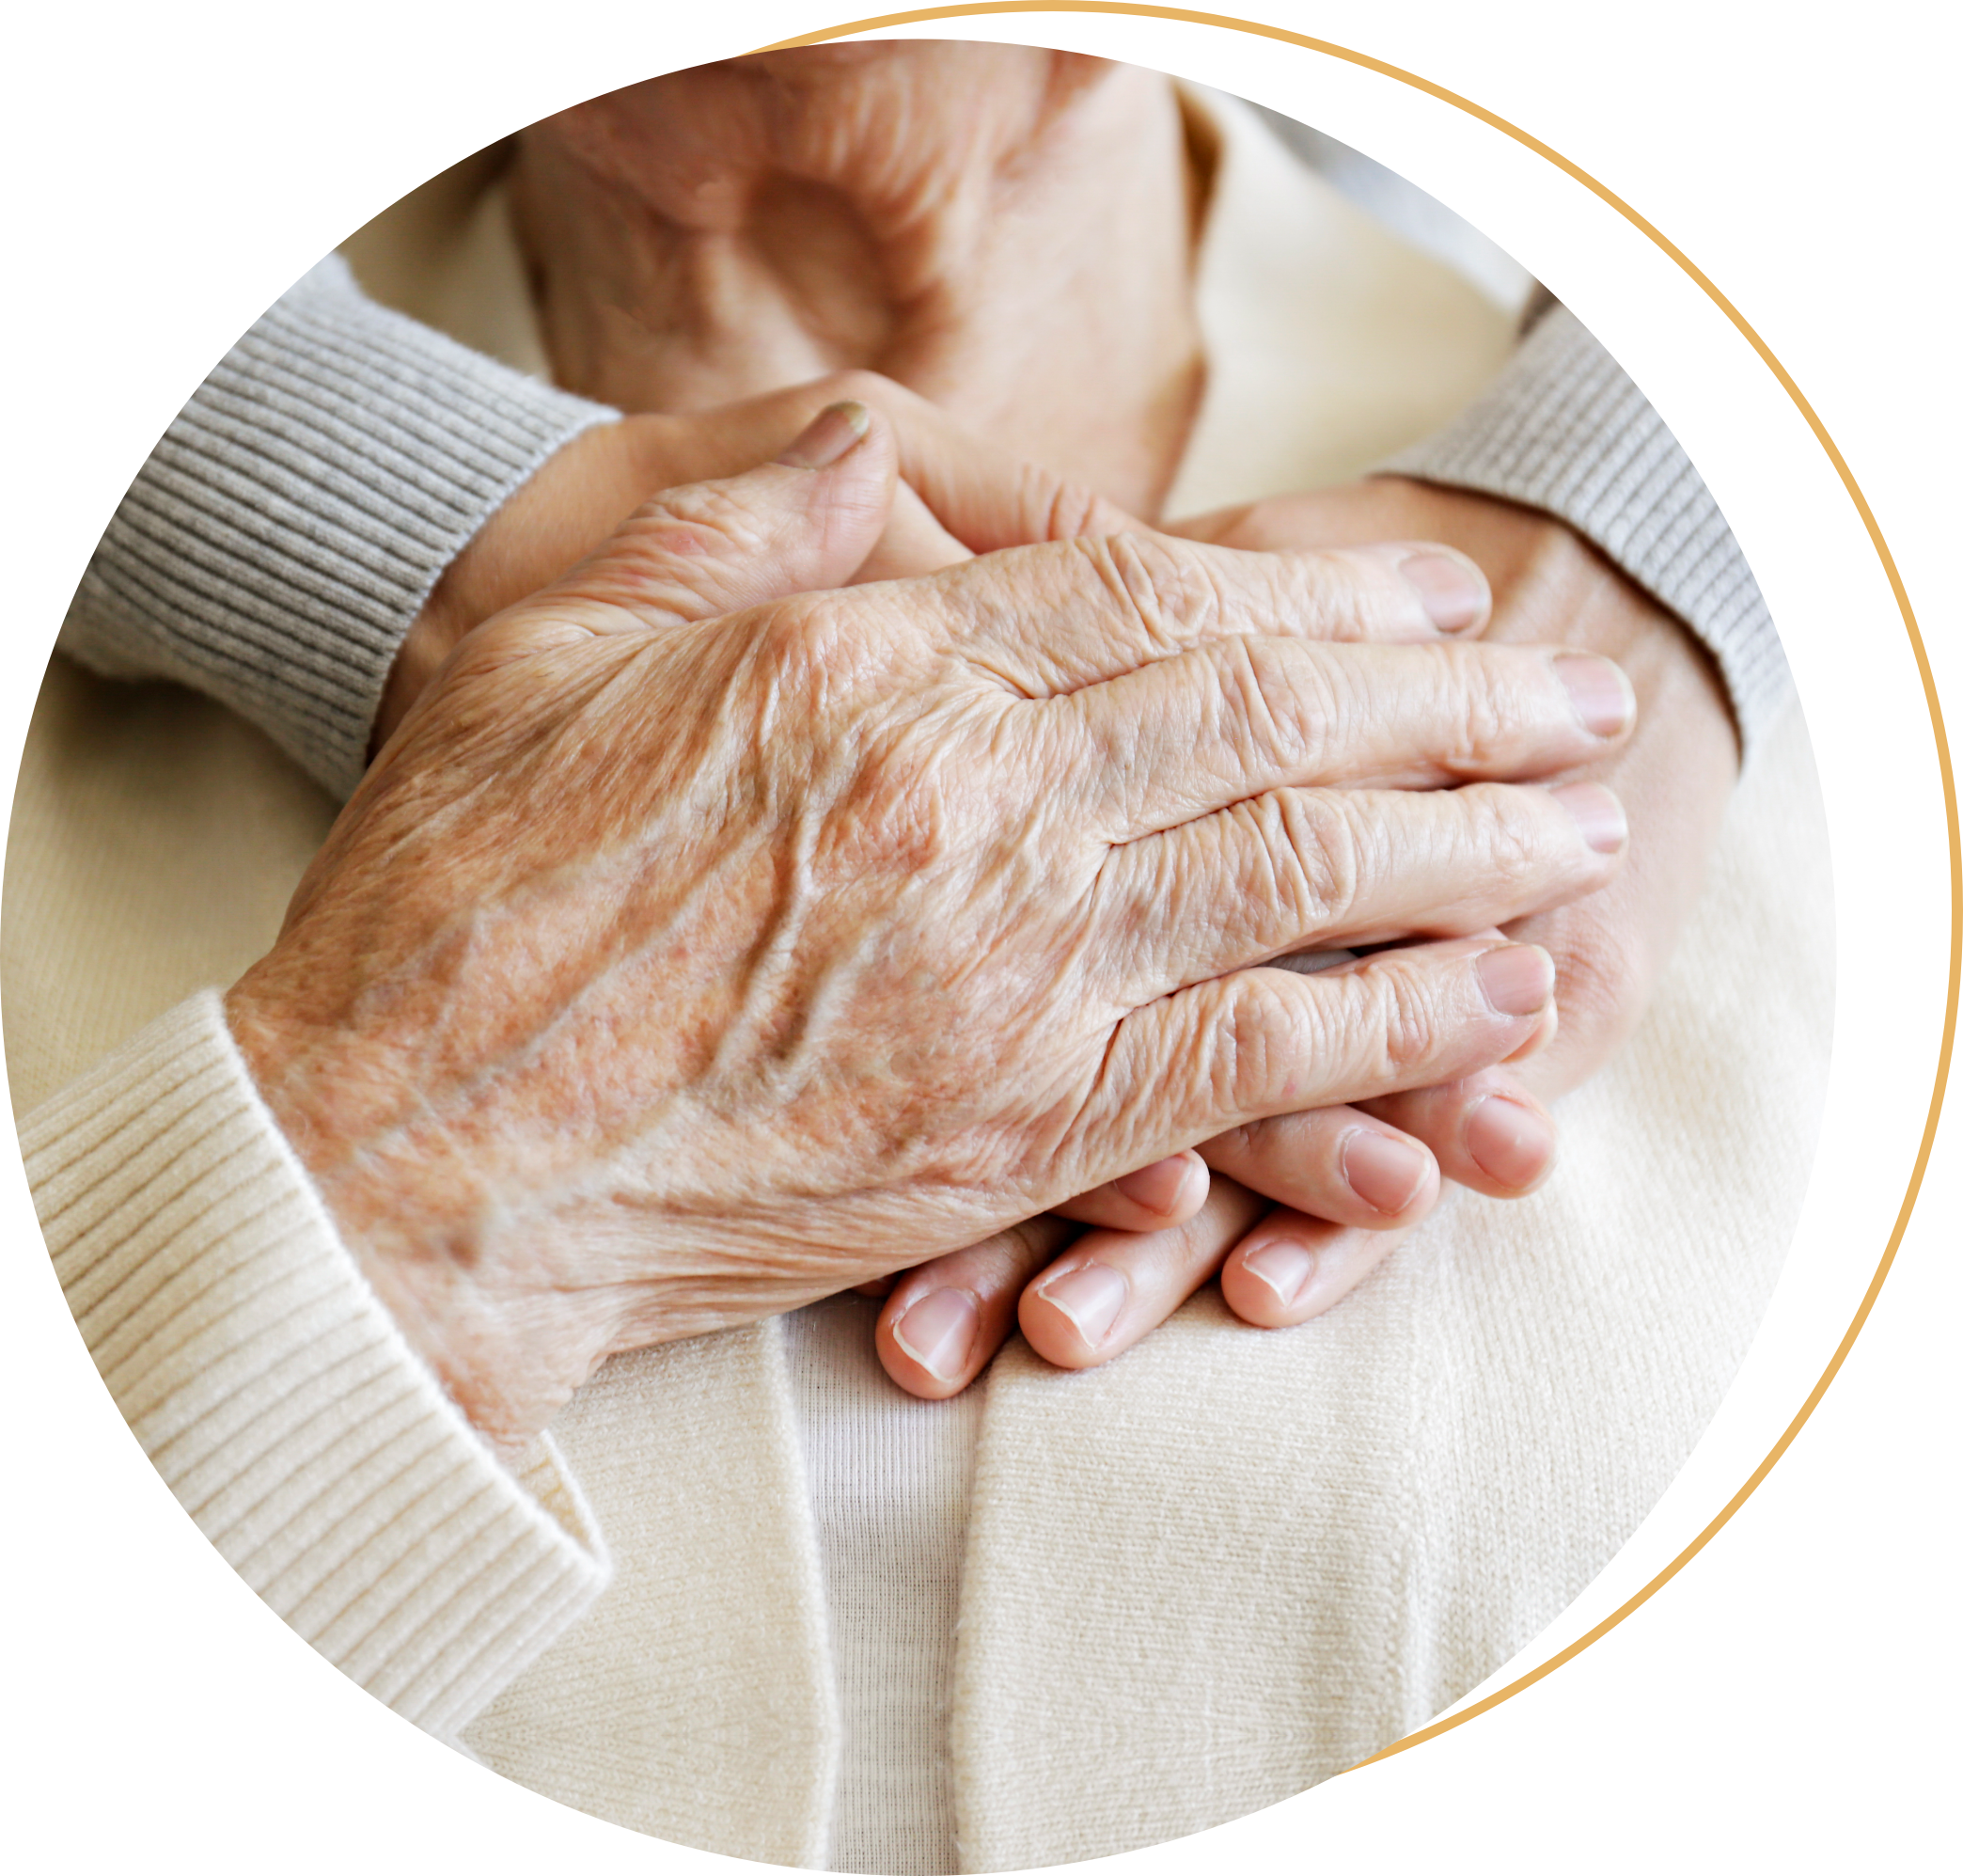 Care Connect Home Care - Elderly Care